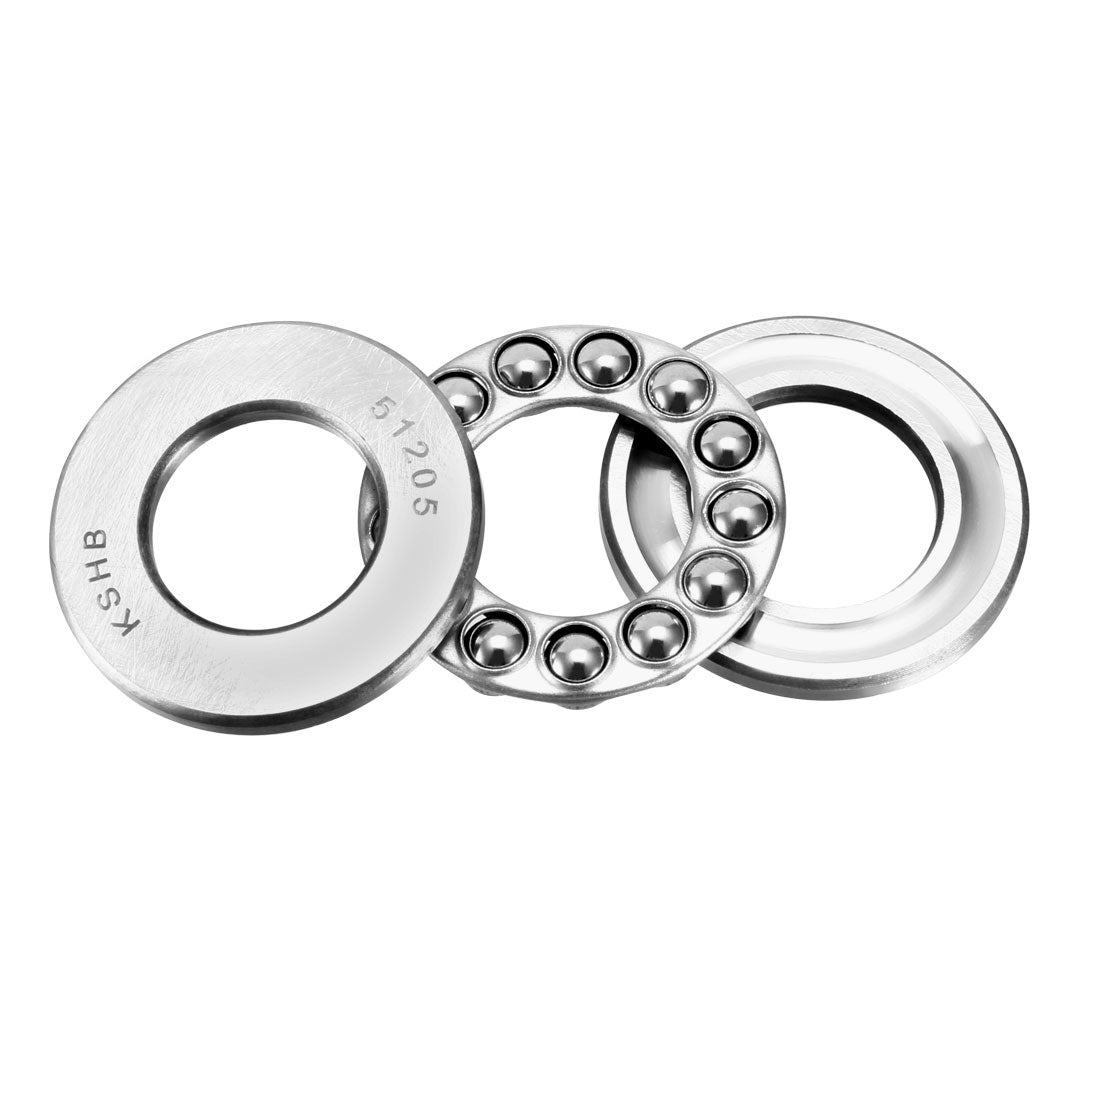 uxcell Uxcell 51205 Single Direction Thrust Ball Bearings 25mm x 47mm x 15mm Chrome Steel